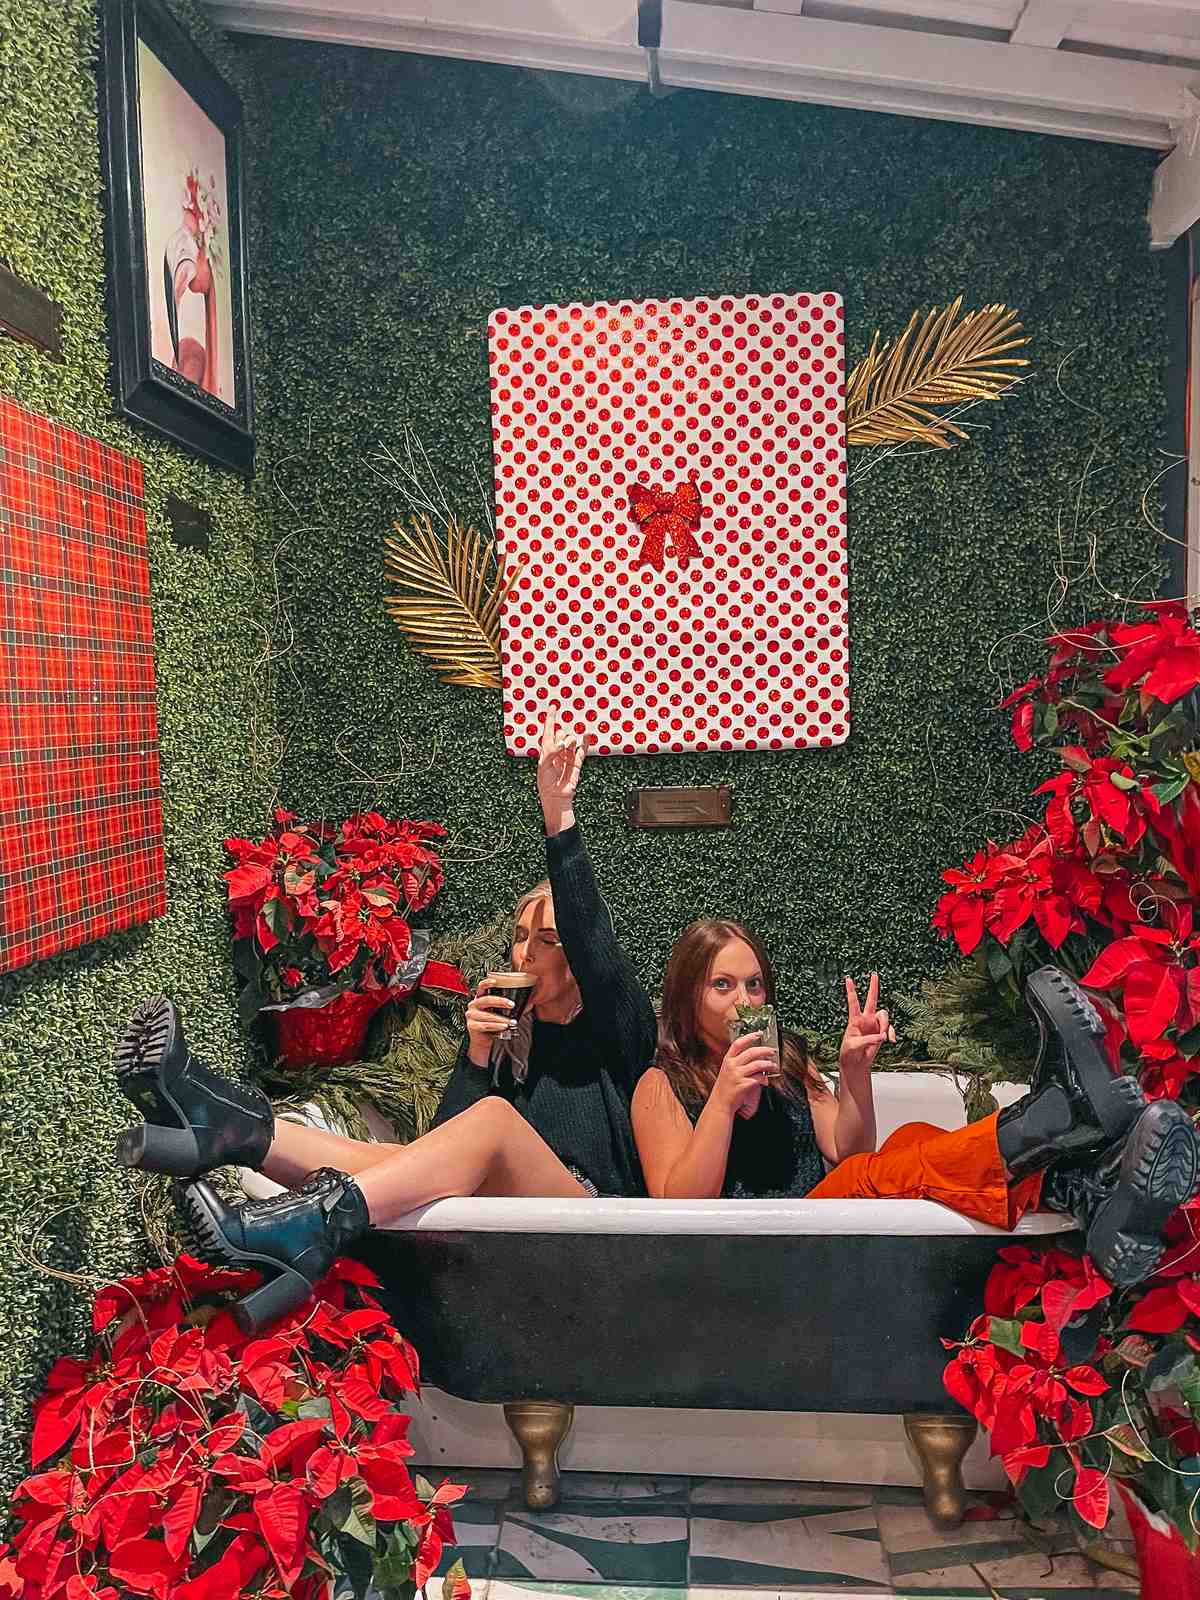 Mandarin Heights bar tub photo op decorated for Christmas time